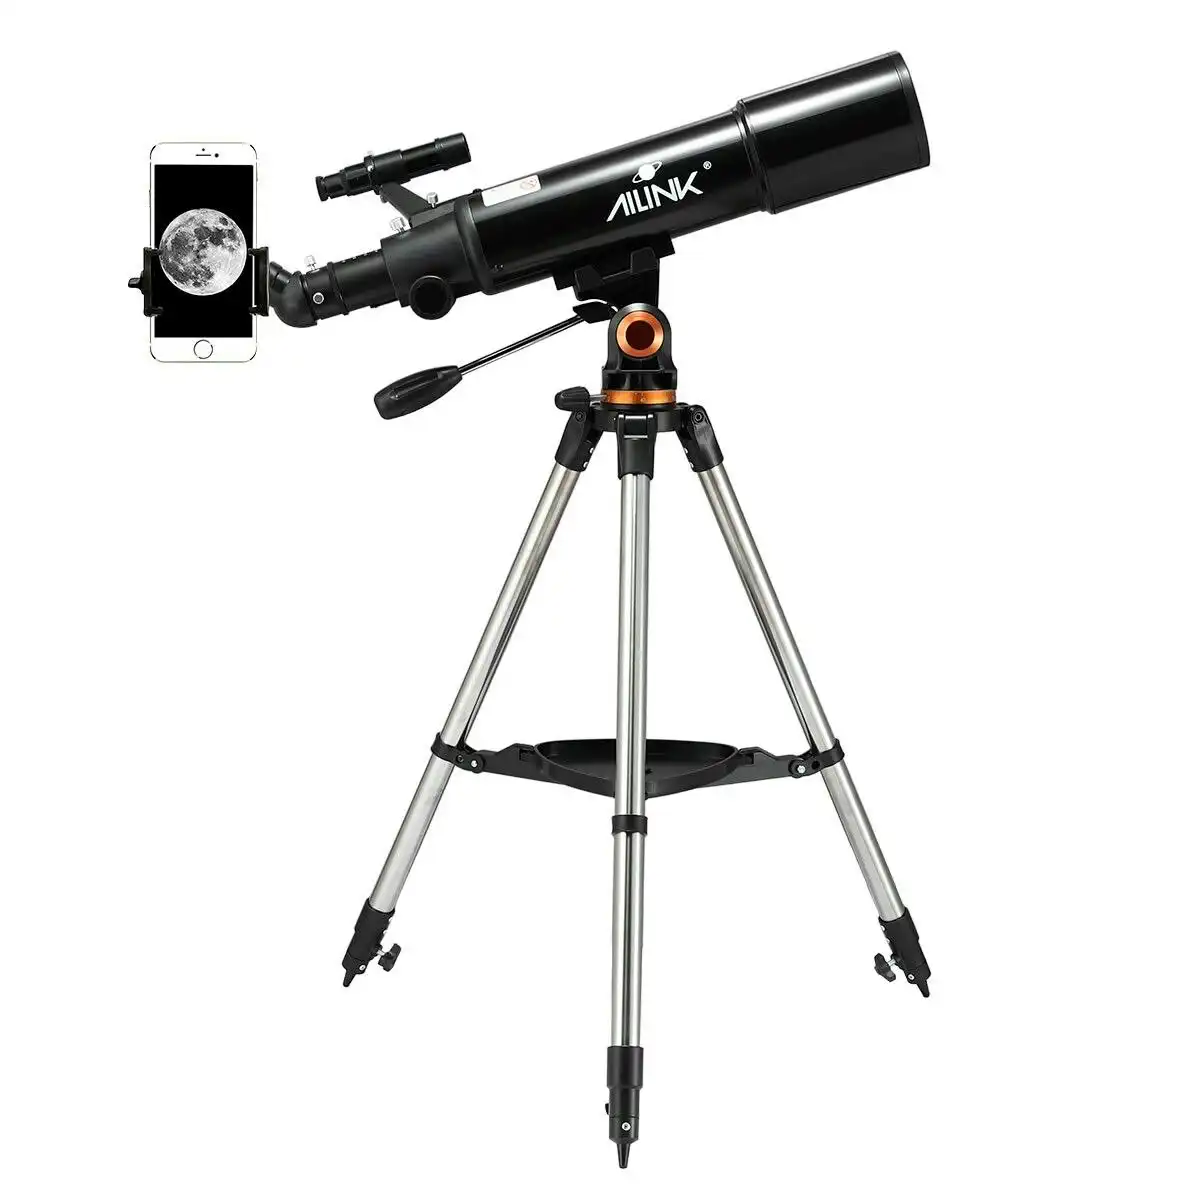 Ausway 50080 Monocular Astronomical Telescope Space Outdoor with Tripod and Backpack